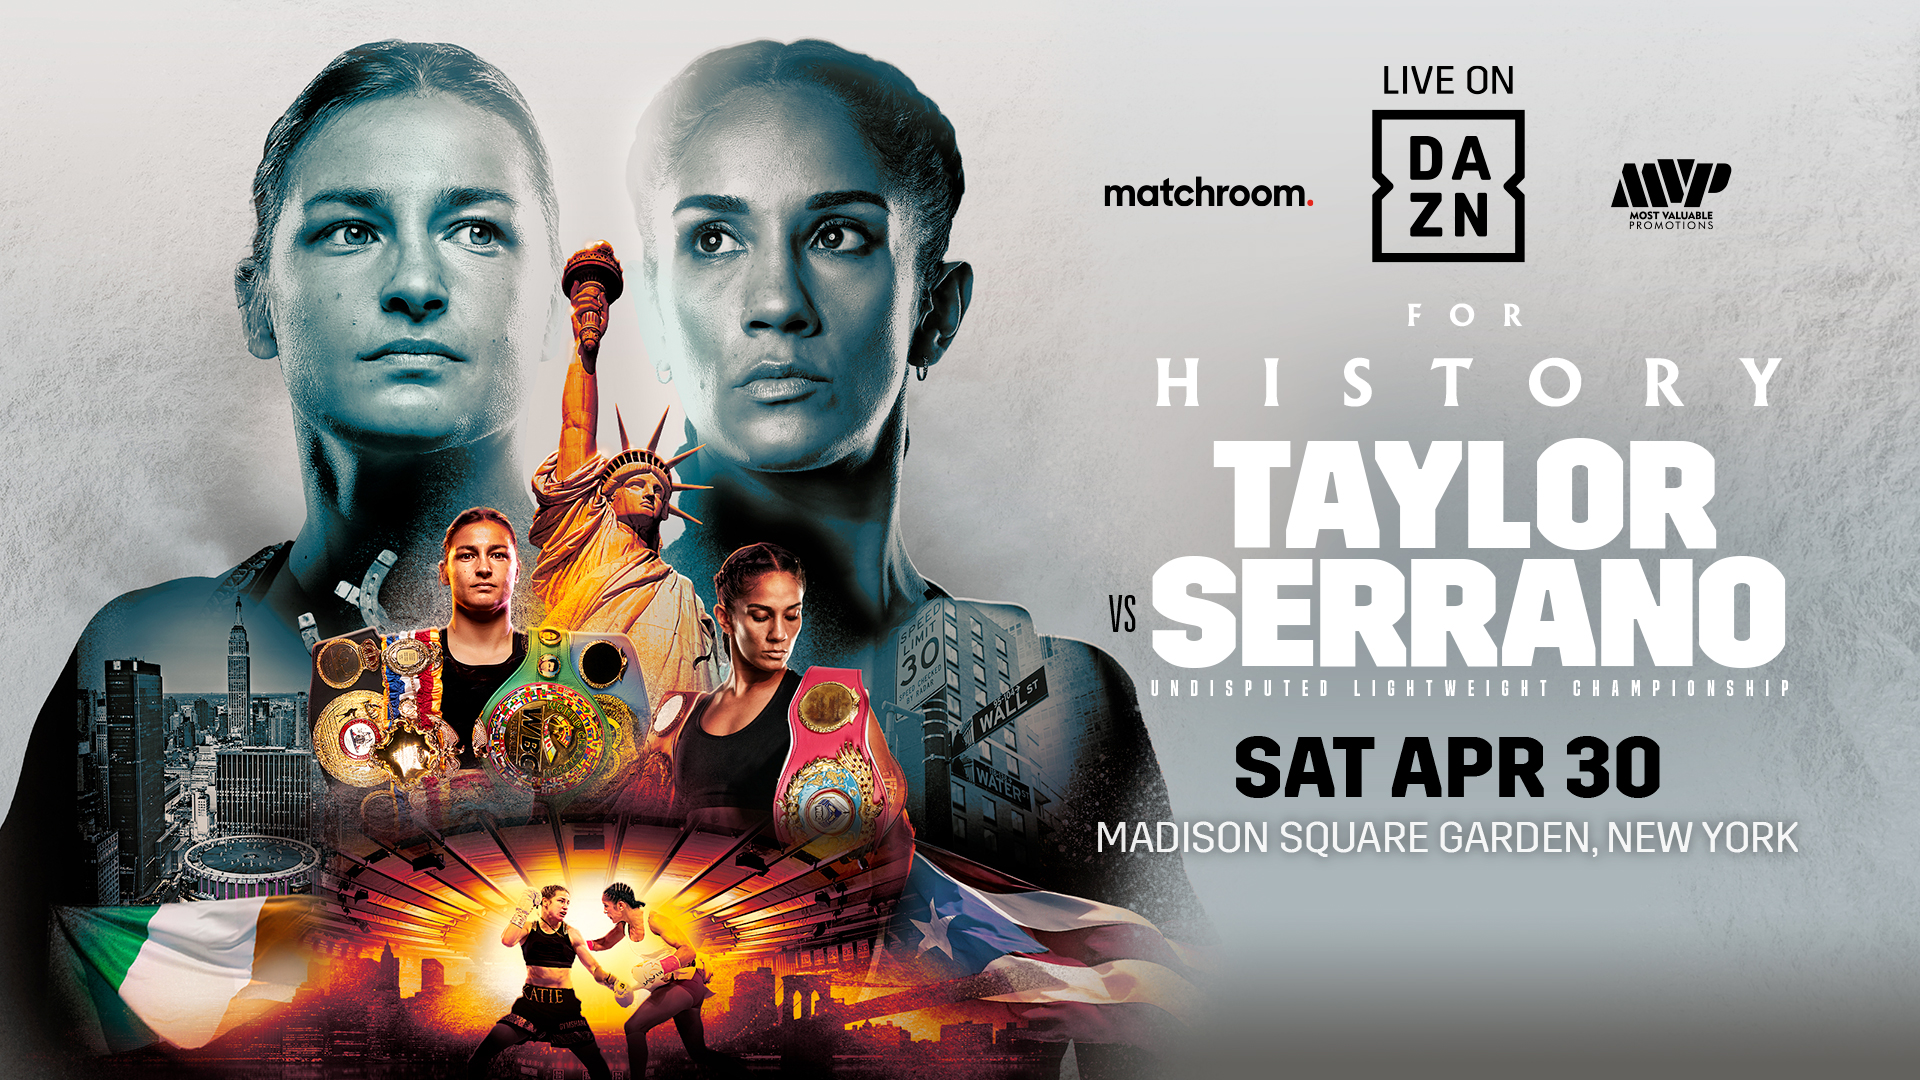 KATIE TAYLOR AND AMANDA SERRANO TO MEET IN HISTORIC BOXING CLASH ON APRIL 30